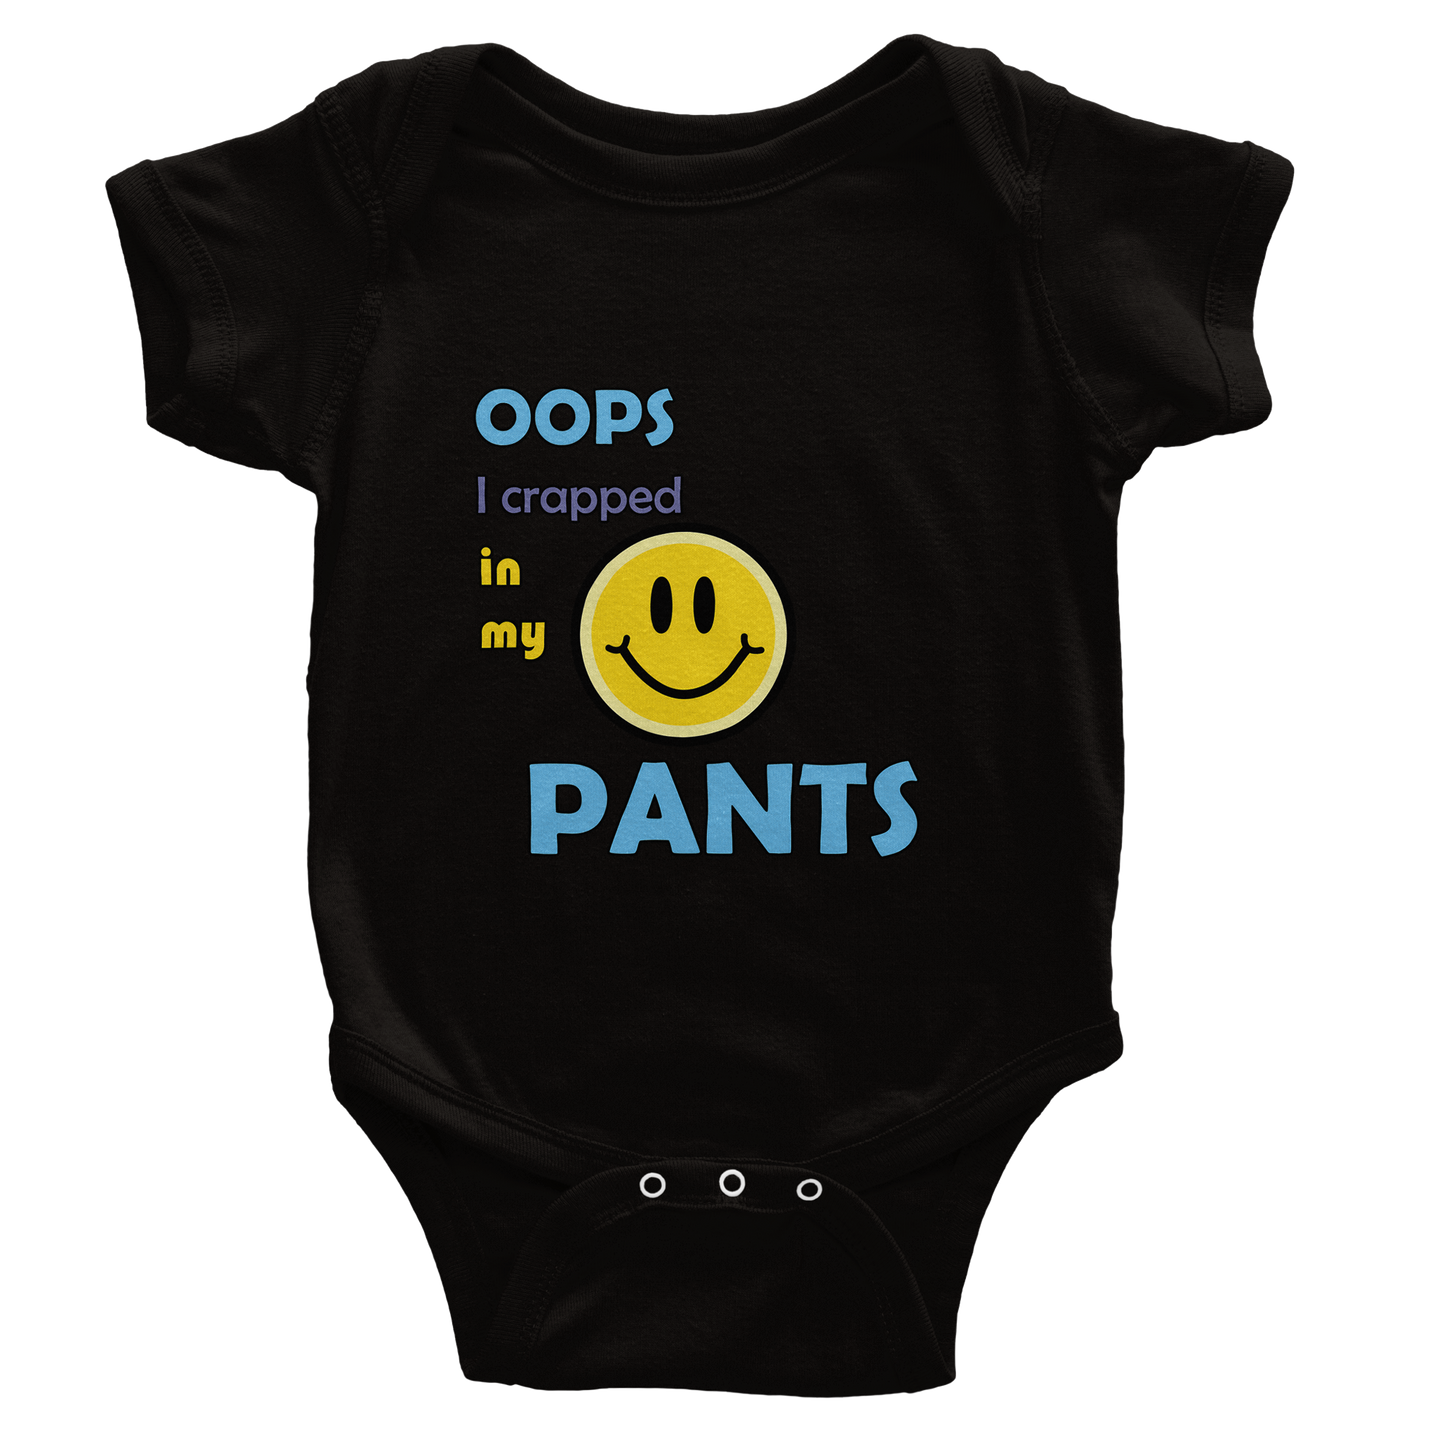 Oops! Time for a Change: Funny Baby One Piece